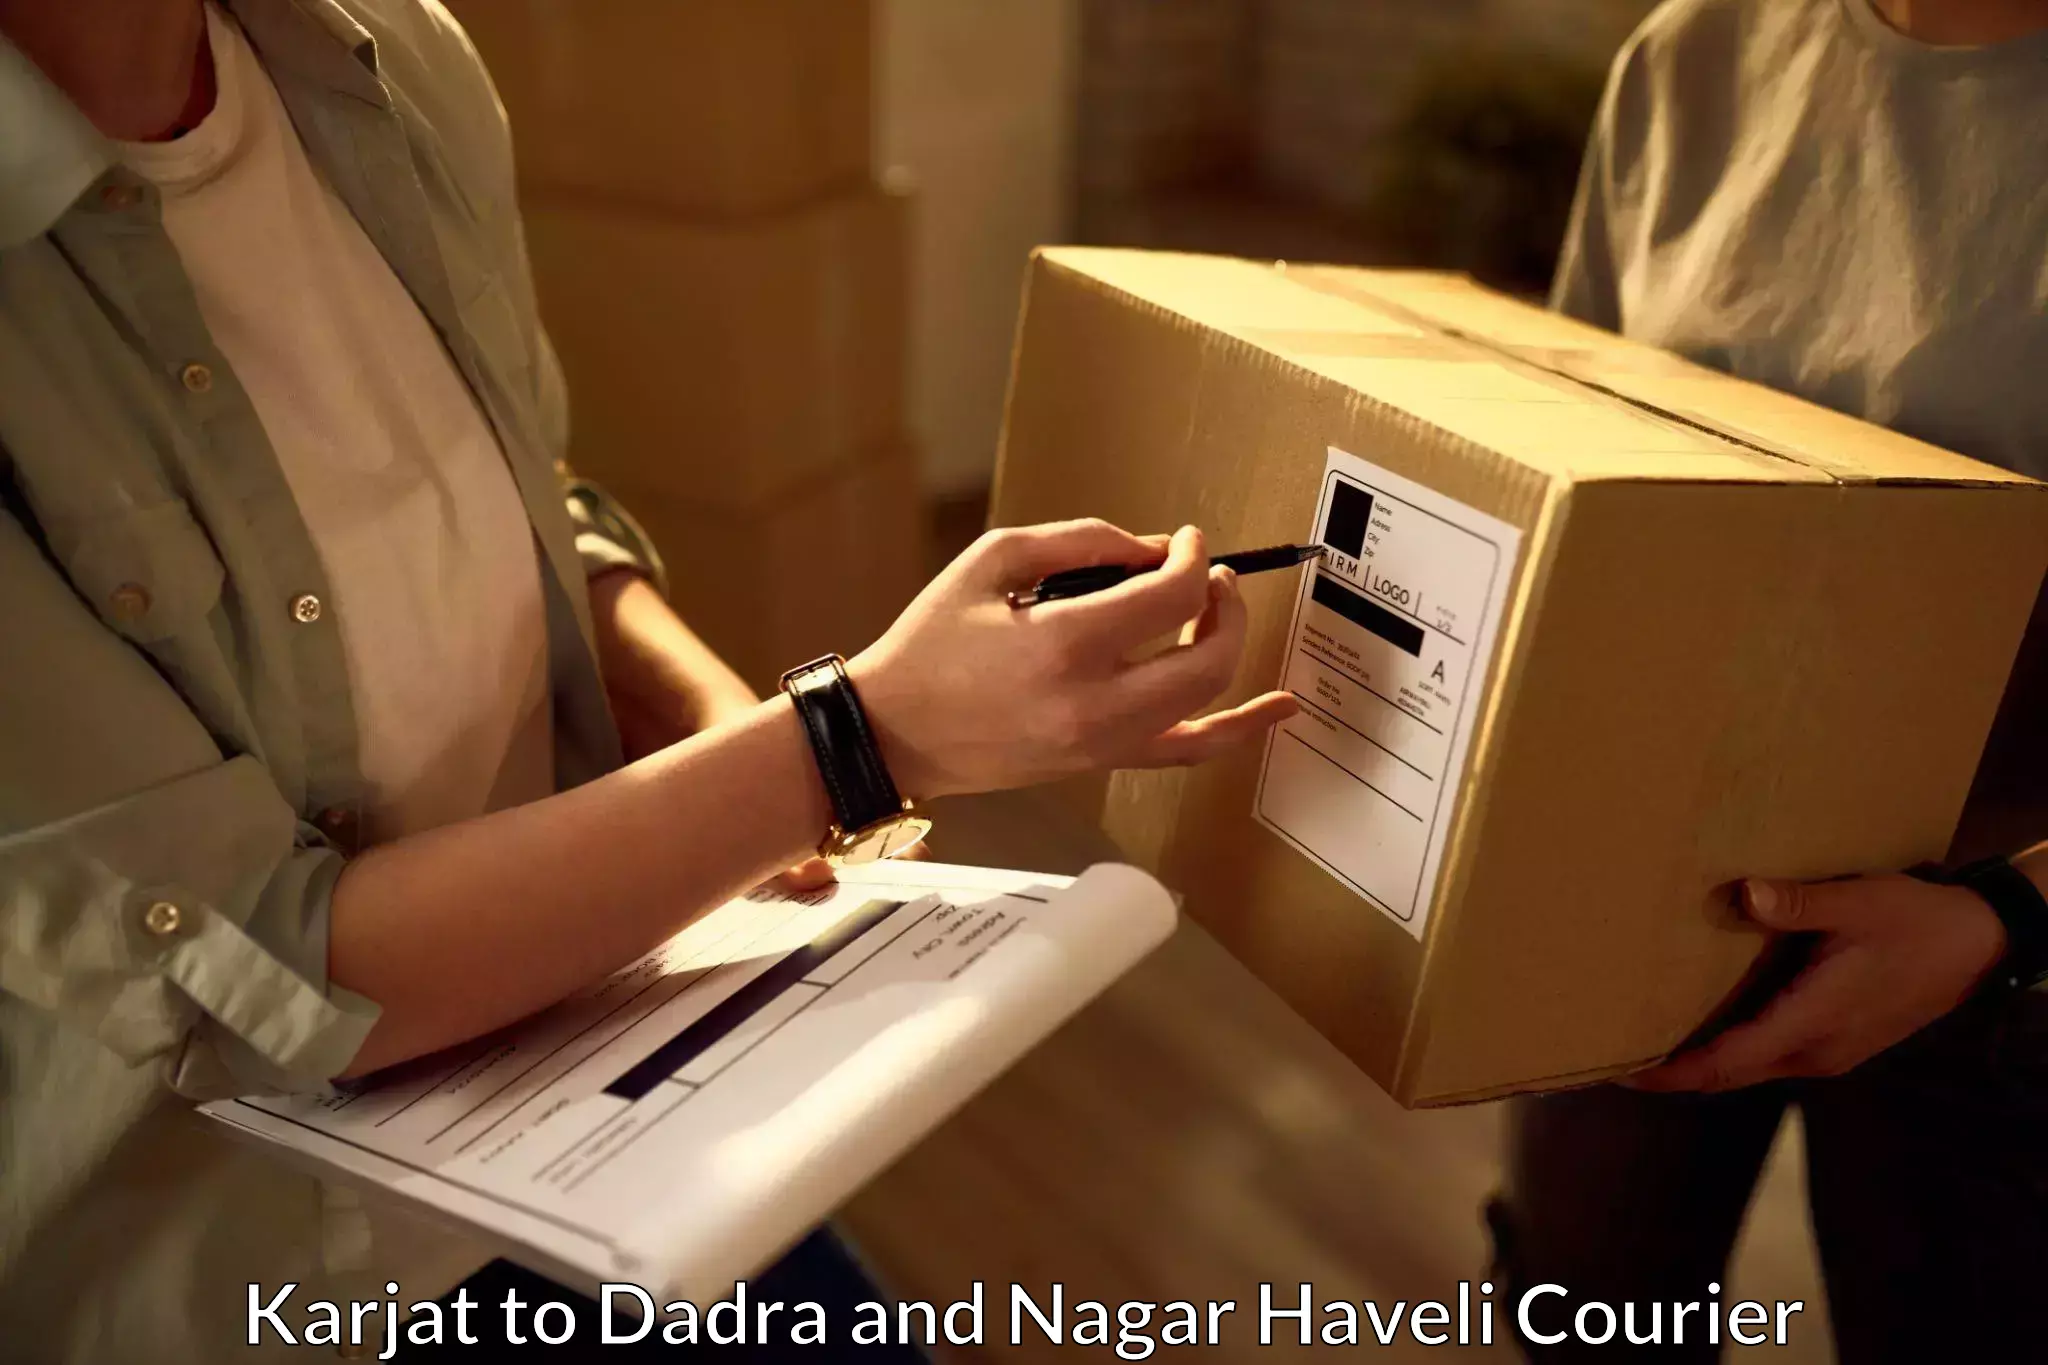 User-friendly delivery service Karjat to Dadra and Nagar Haveli